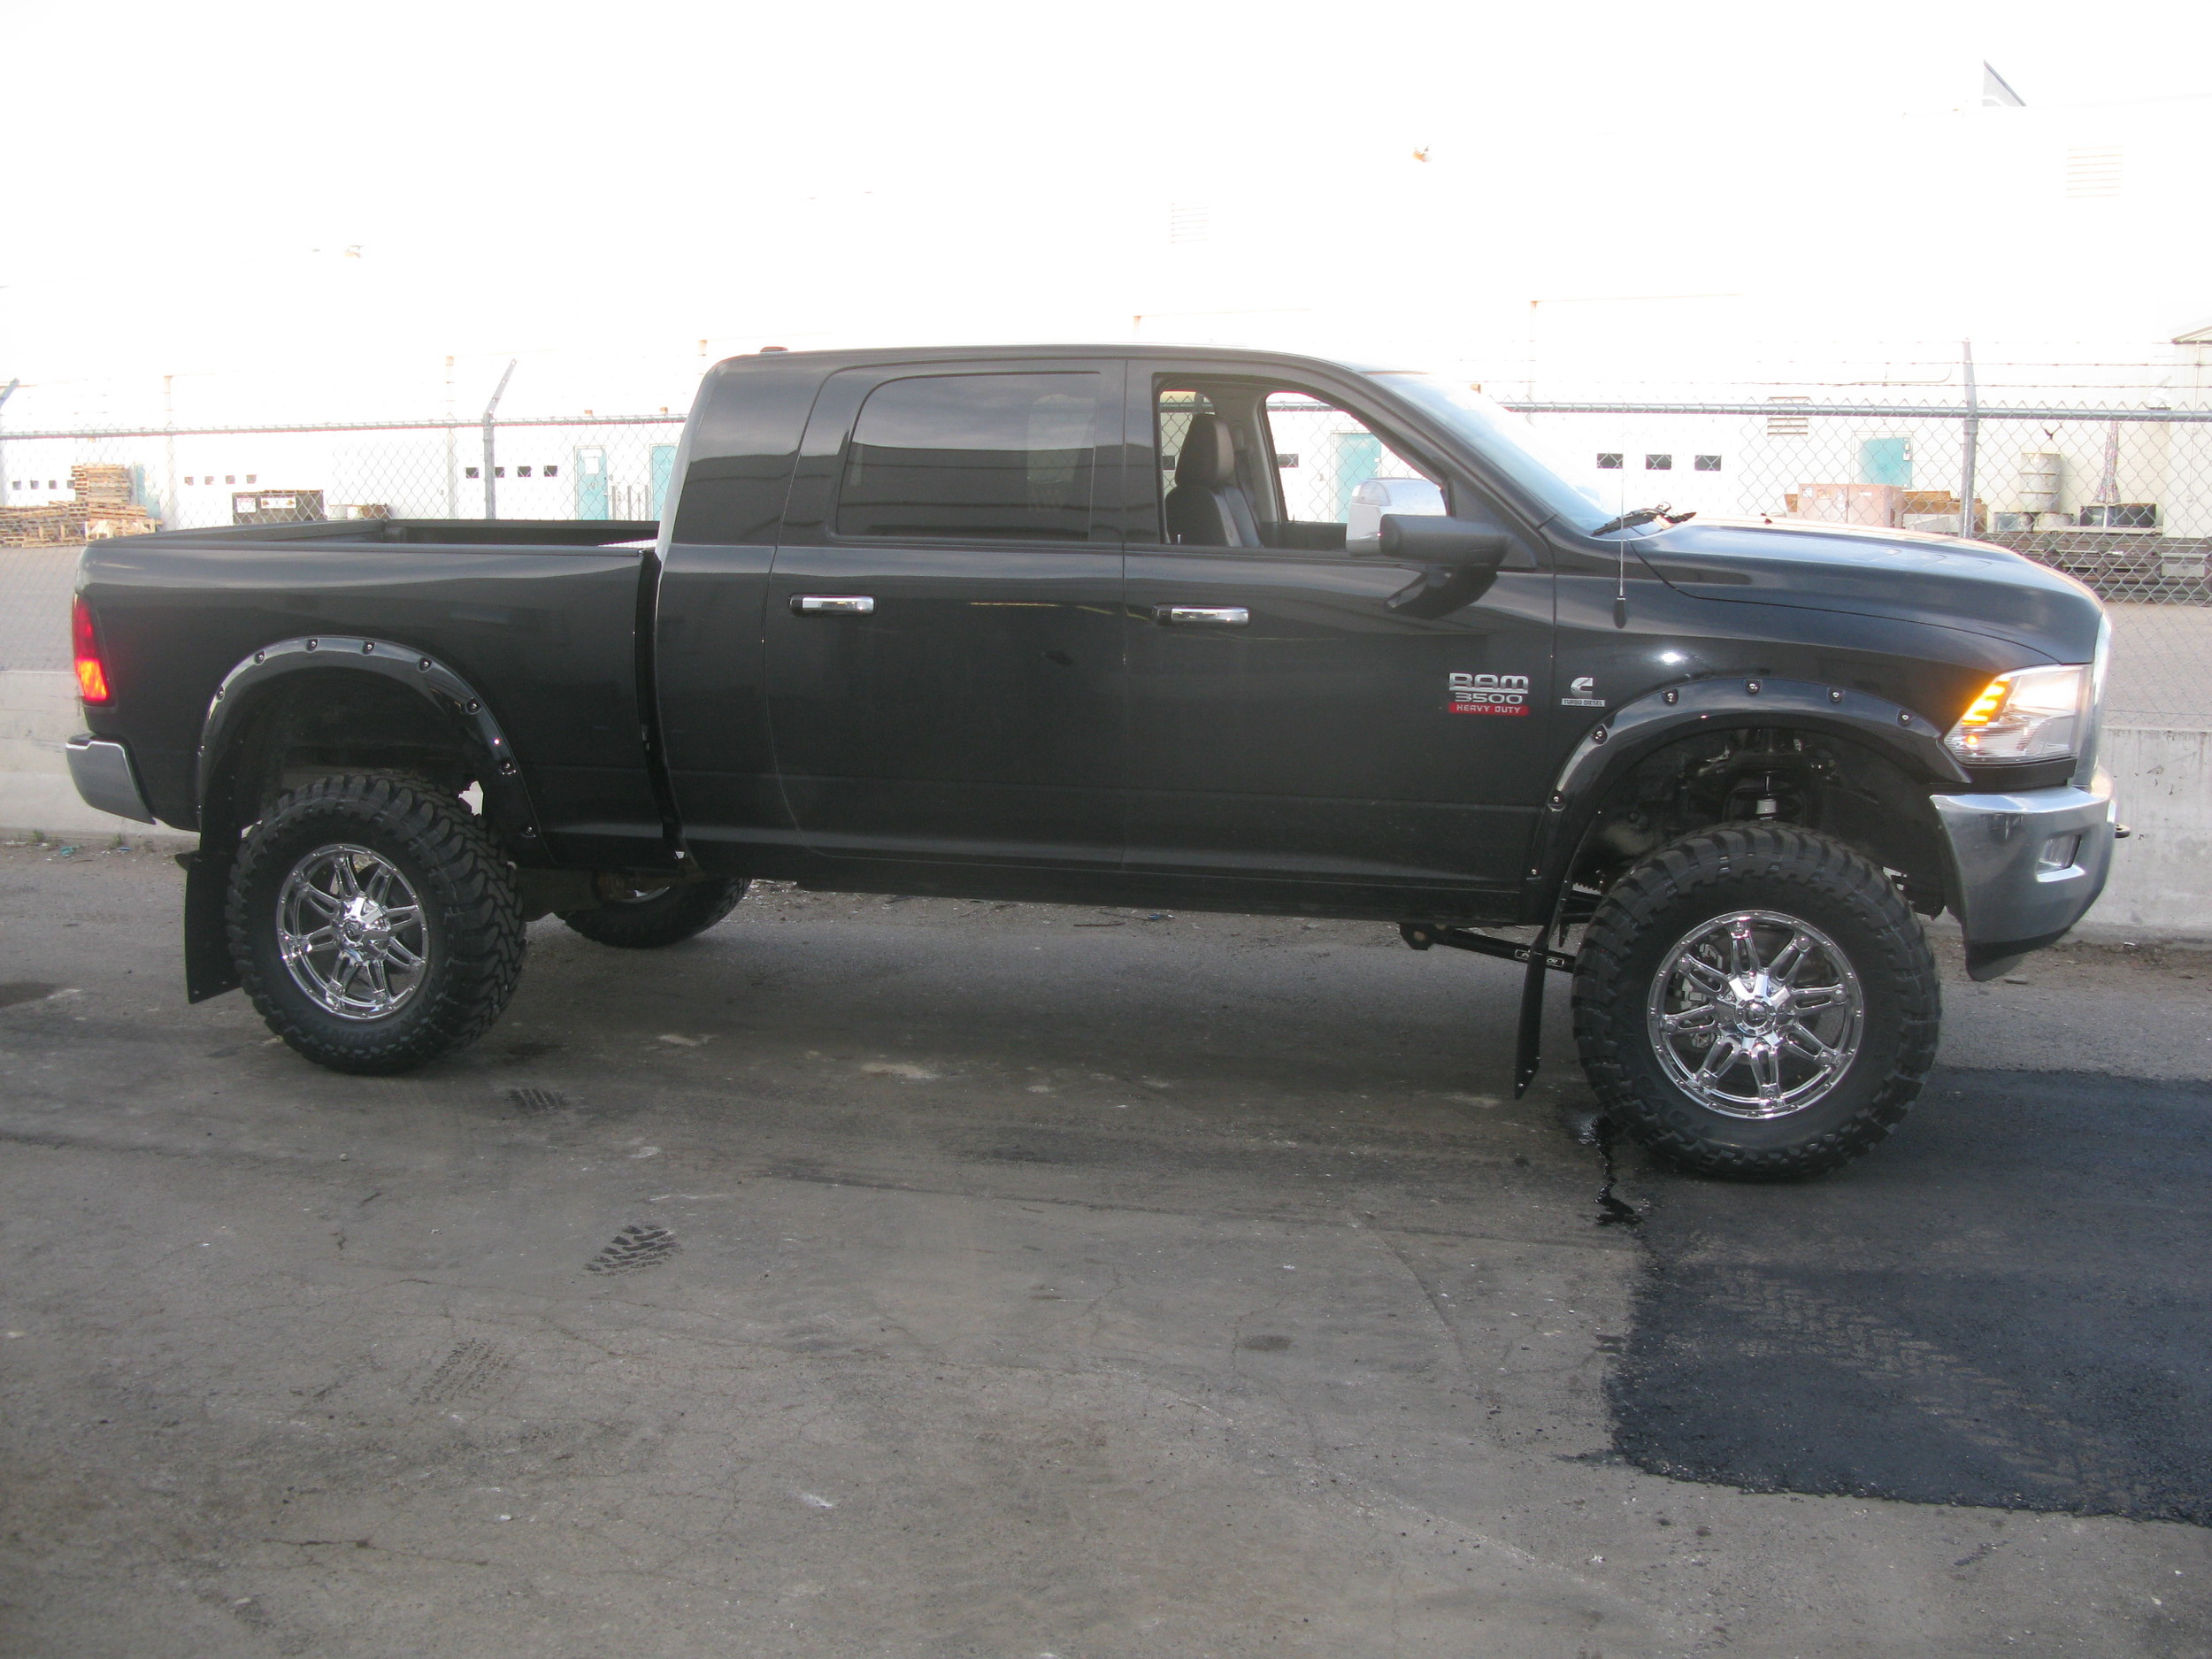 Some 37" Toyo Open Country M/T's finish this truck off.